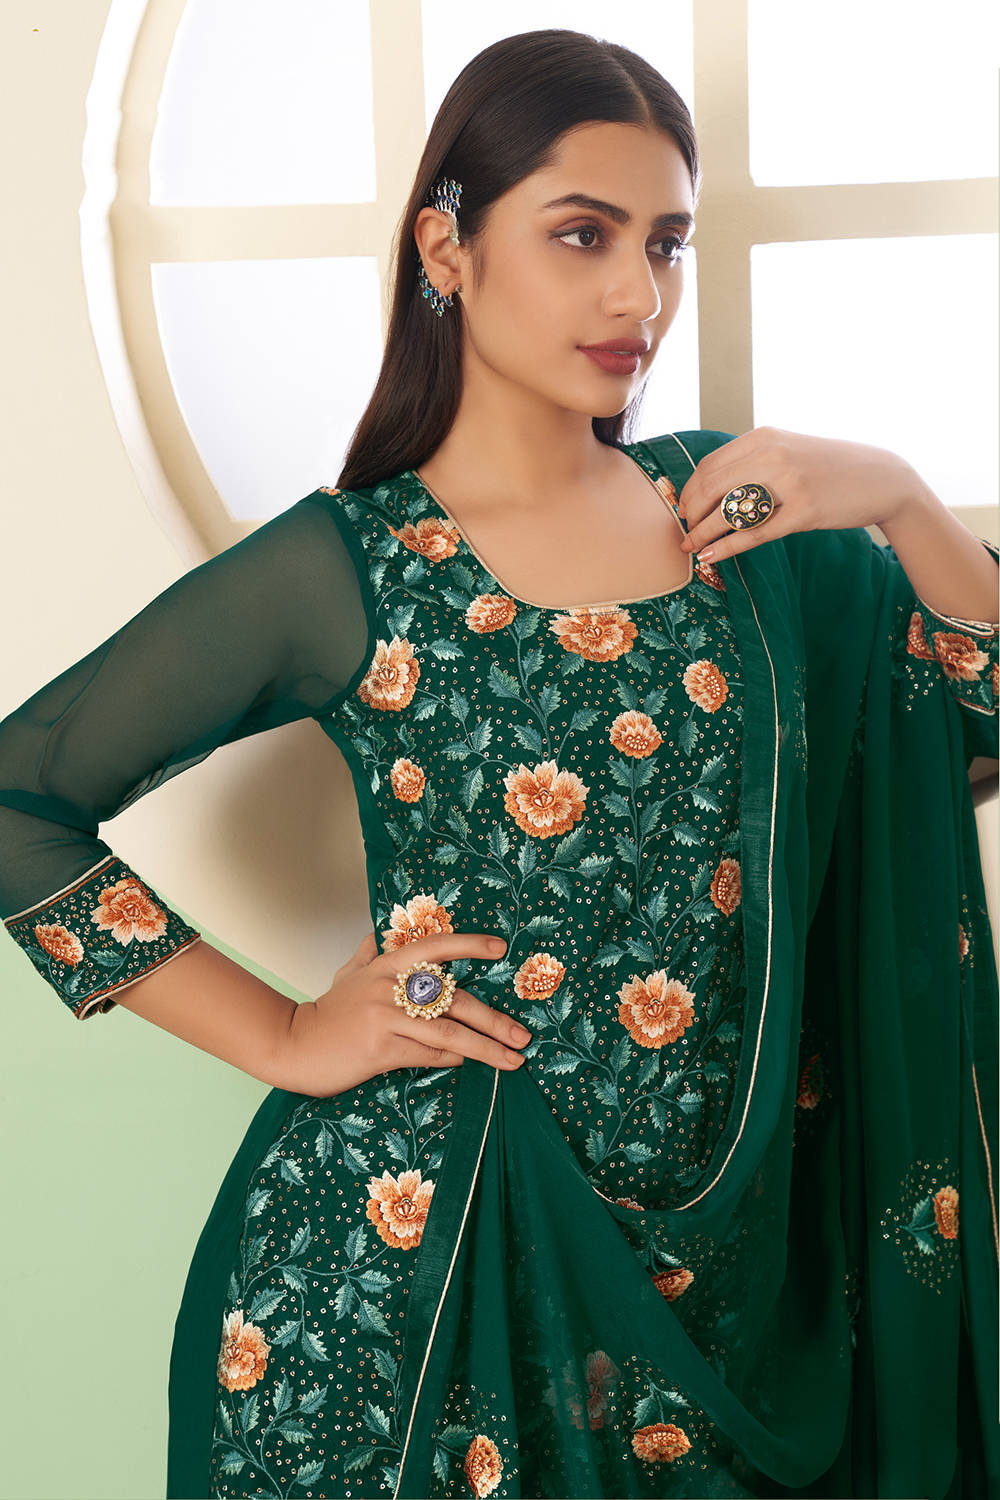 Green Thread Embroidery Georgette Suit With Sharara